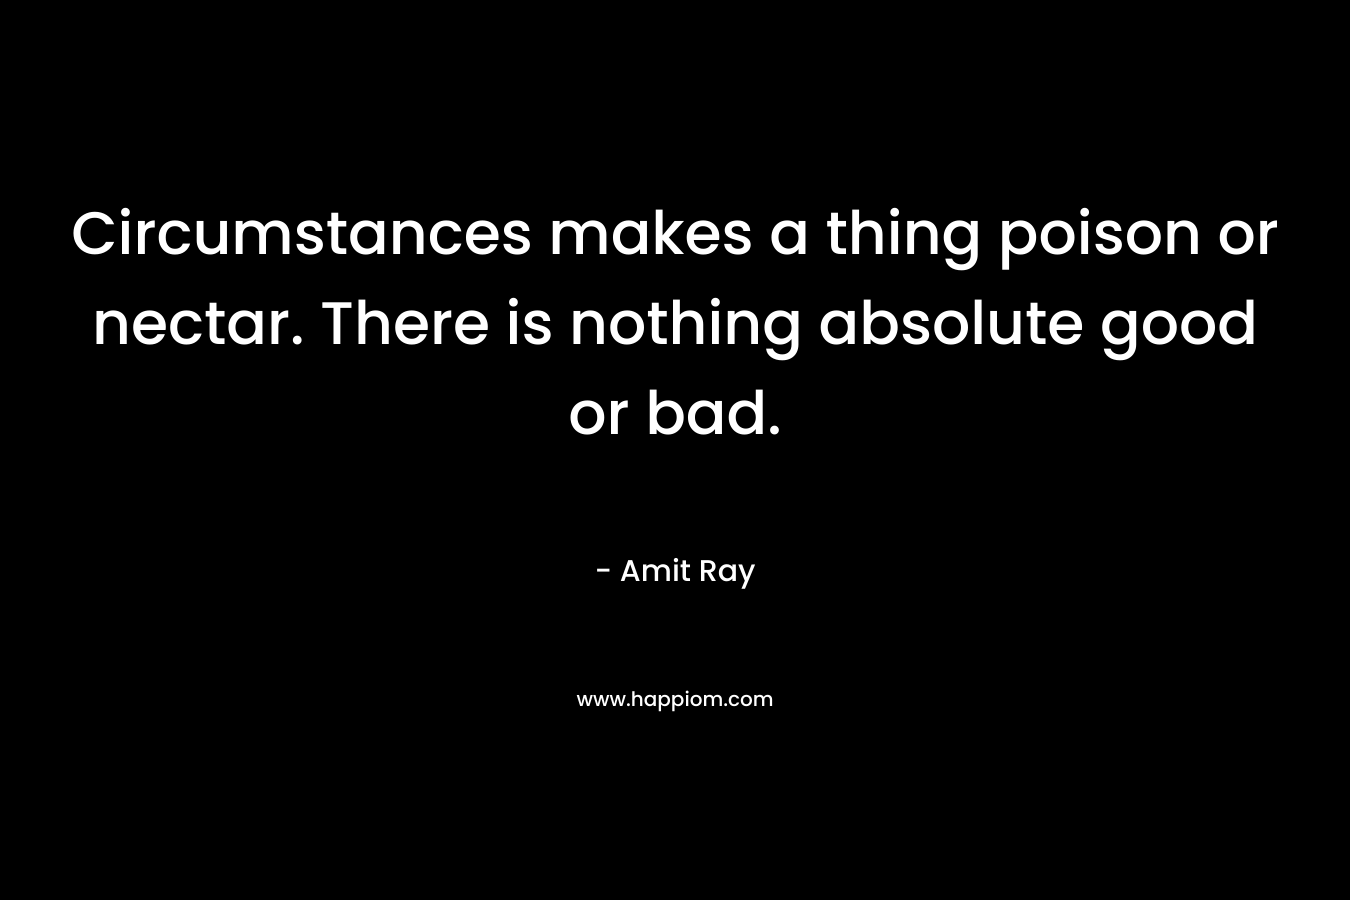 Circumstances makes a thing poison or nectar. There is nothing absolute good or bad.